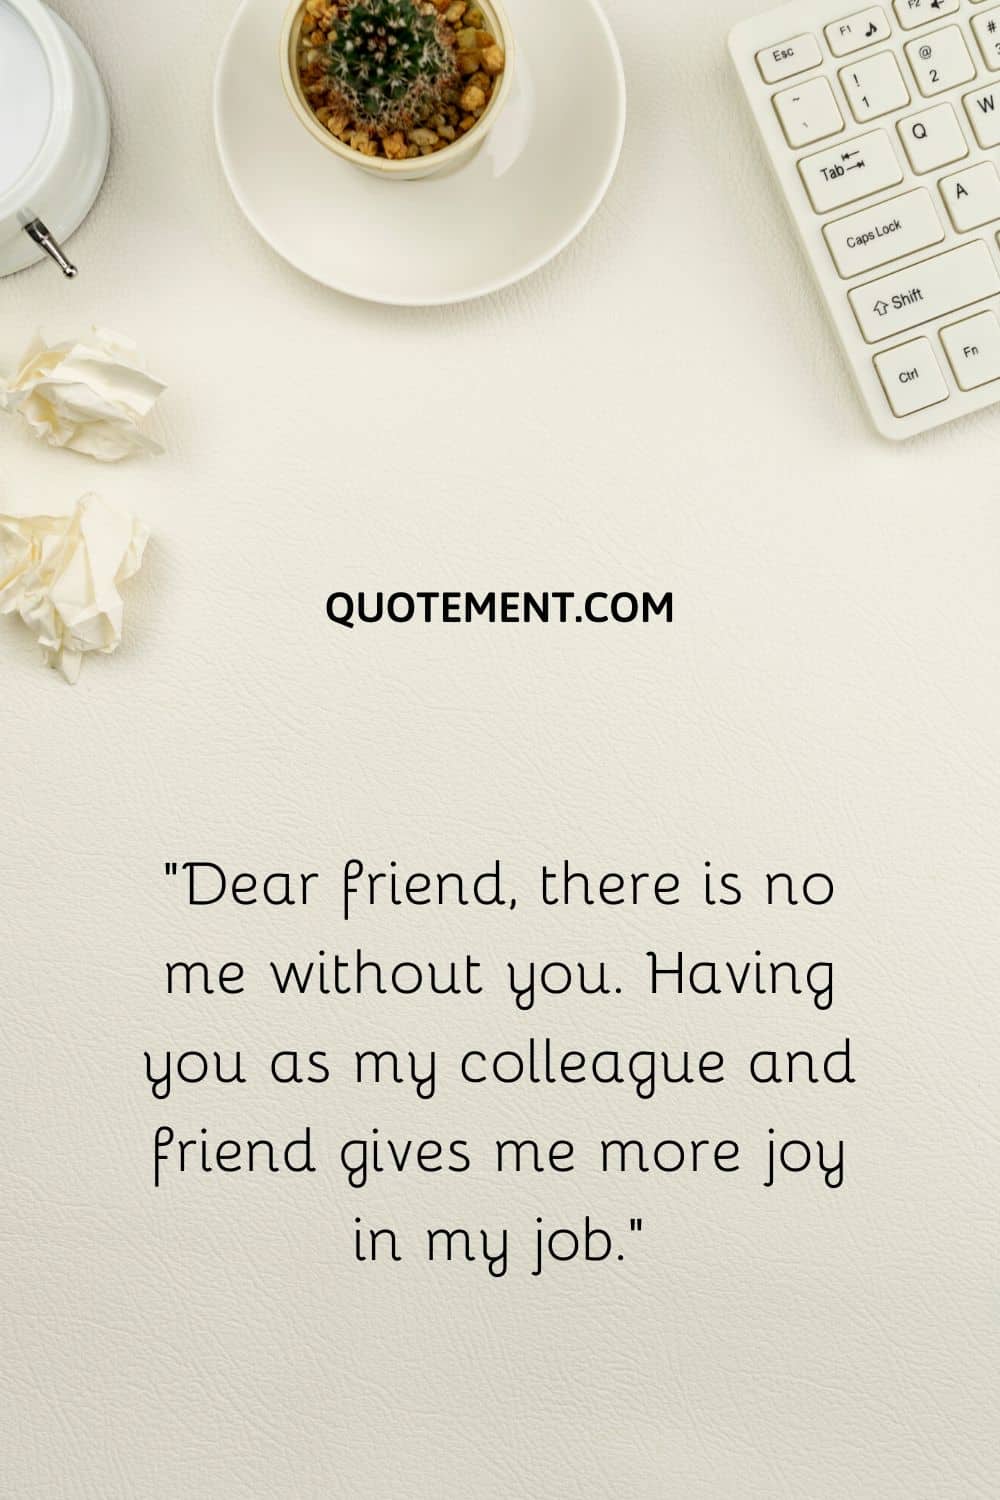 “Dear friend, there is no me without you. Having you as my colleague and friend gives me more joy in my job.”